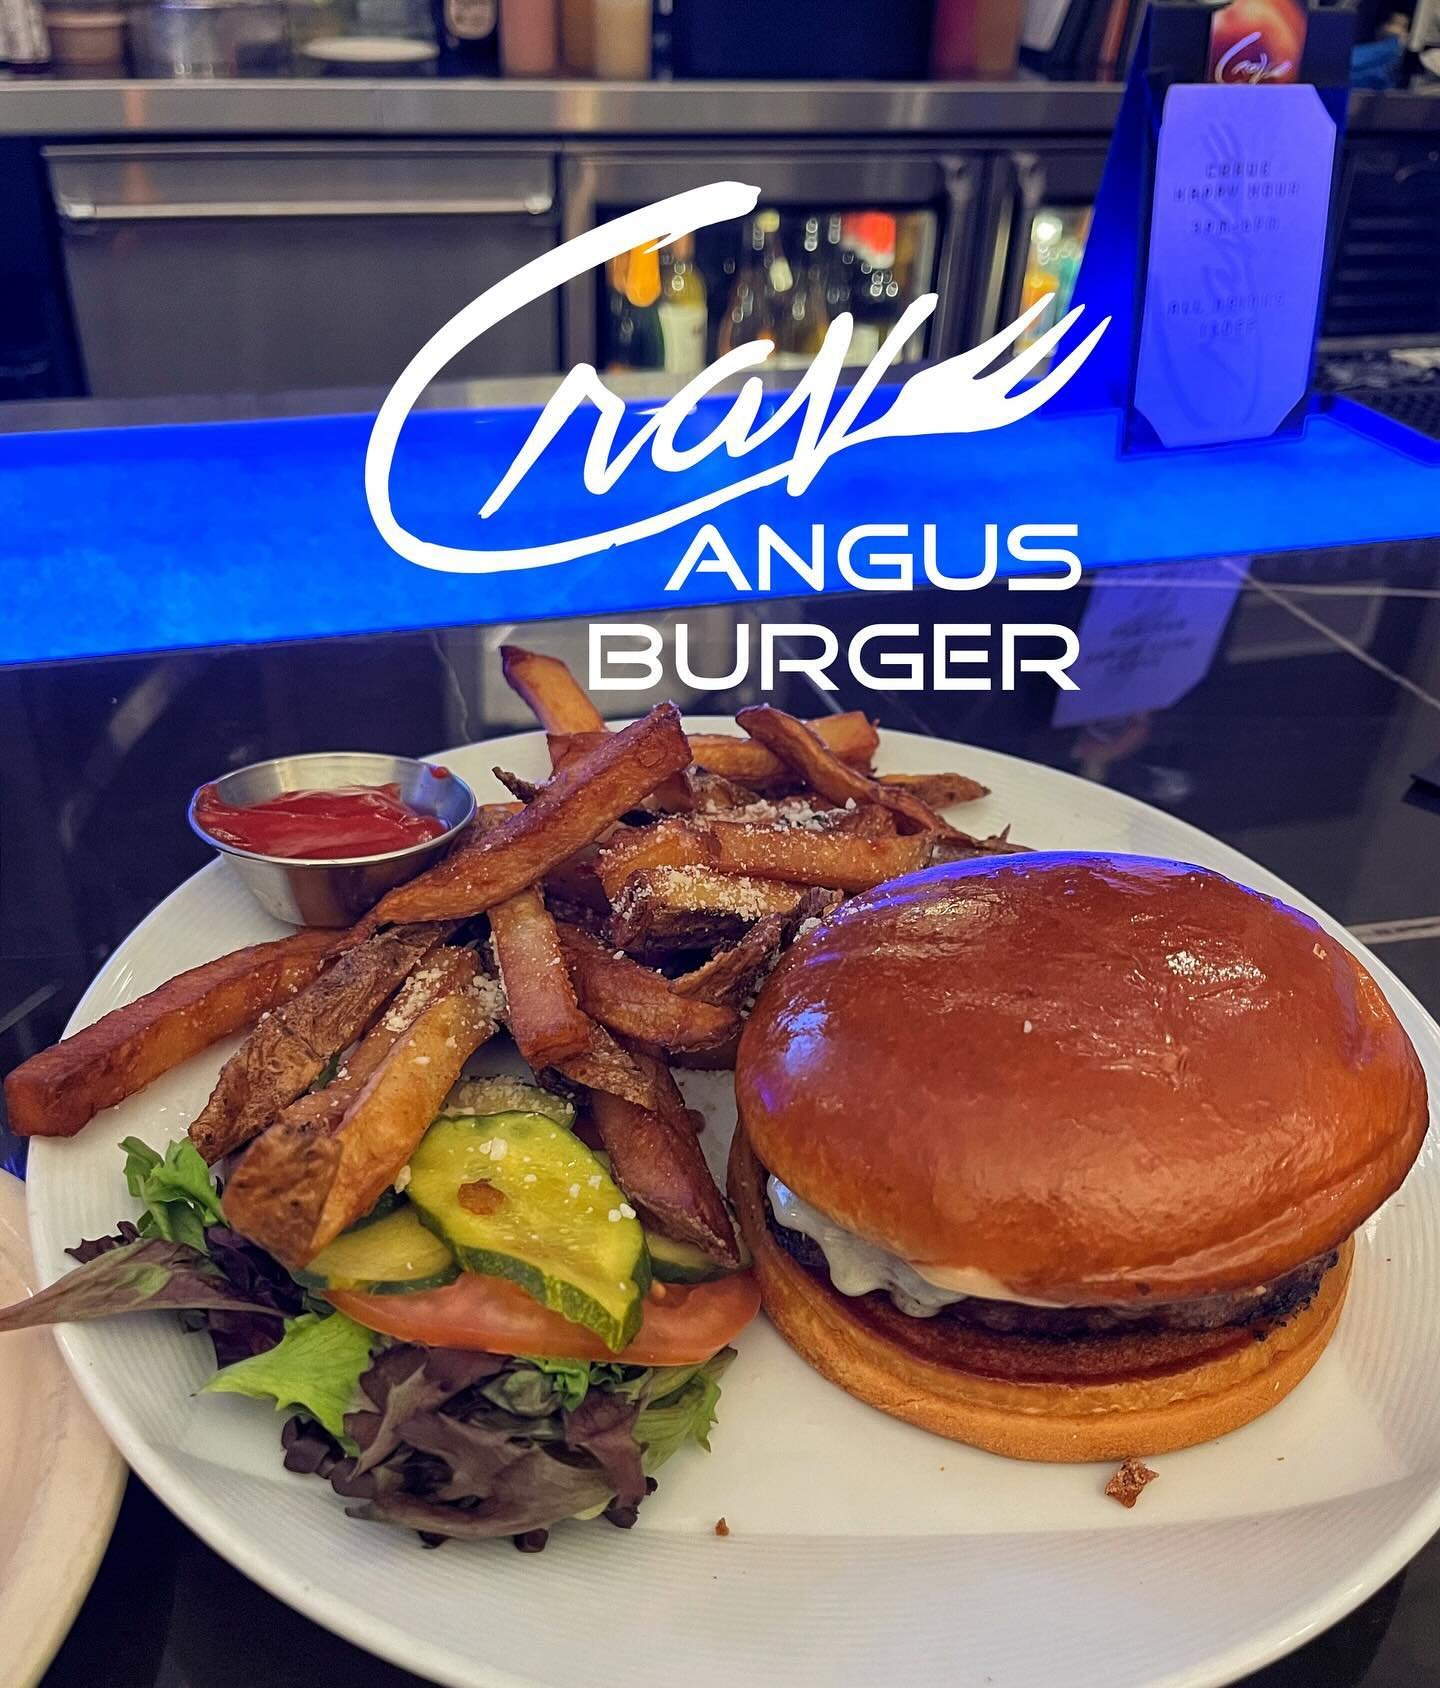 Treat yourself this Friday night with our mouthwatering Angus Burger at Crave! Indulge in the savory flavors of hoisin miso aioli, fried onions, and your choice of cheese, all served on a brioche bun. Join us and savor every bite of this delicious cr